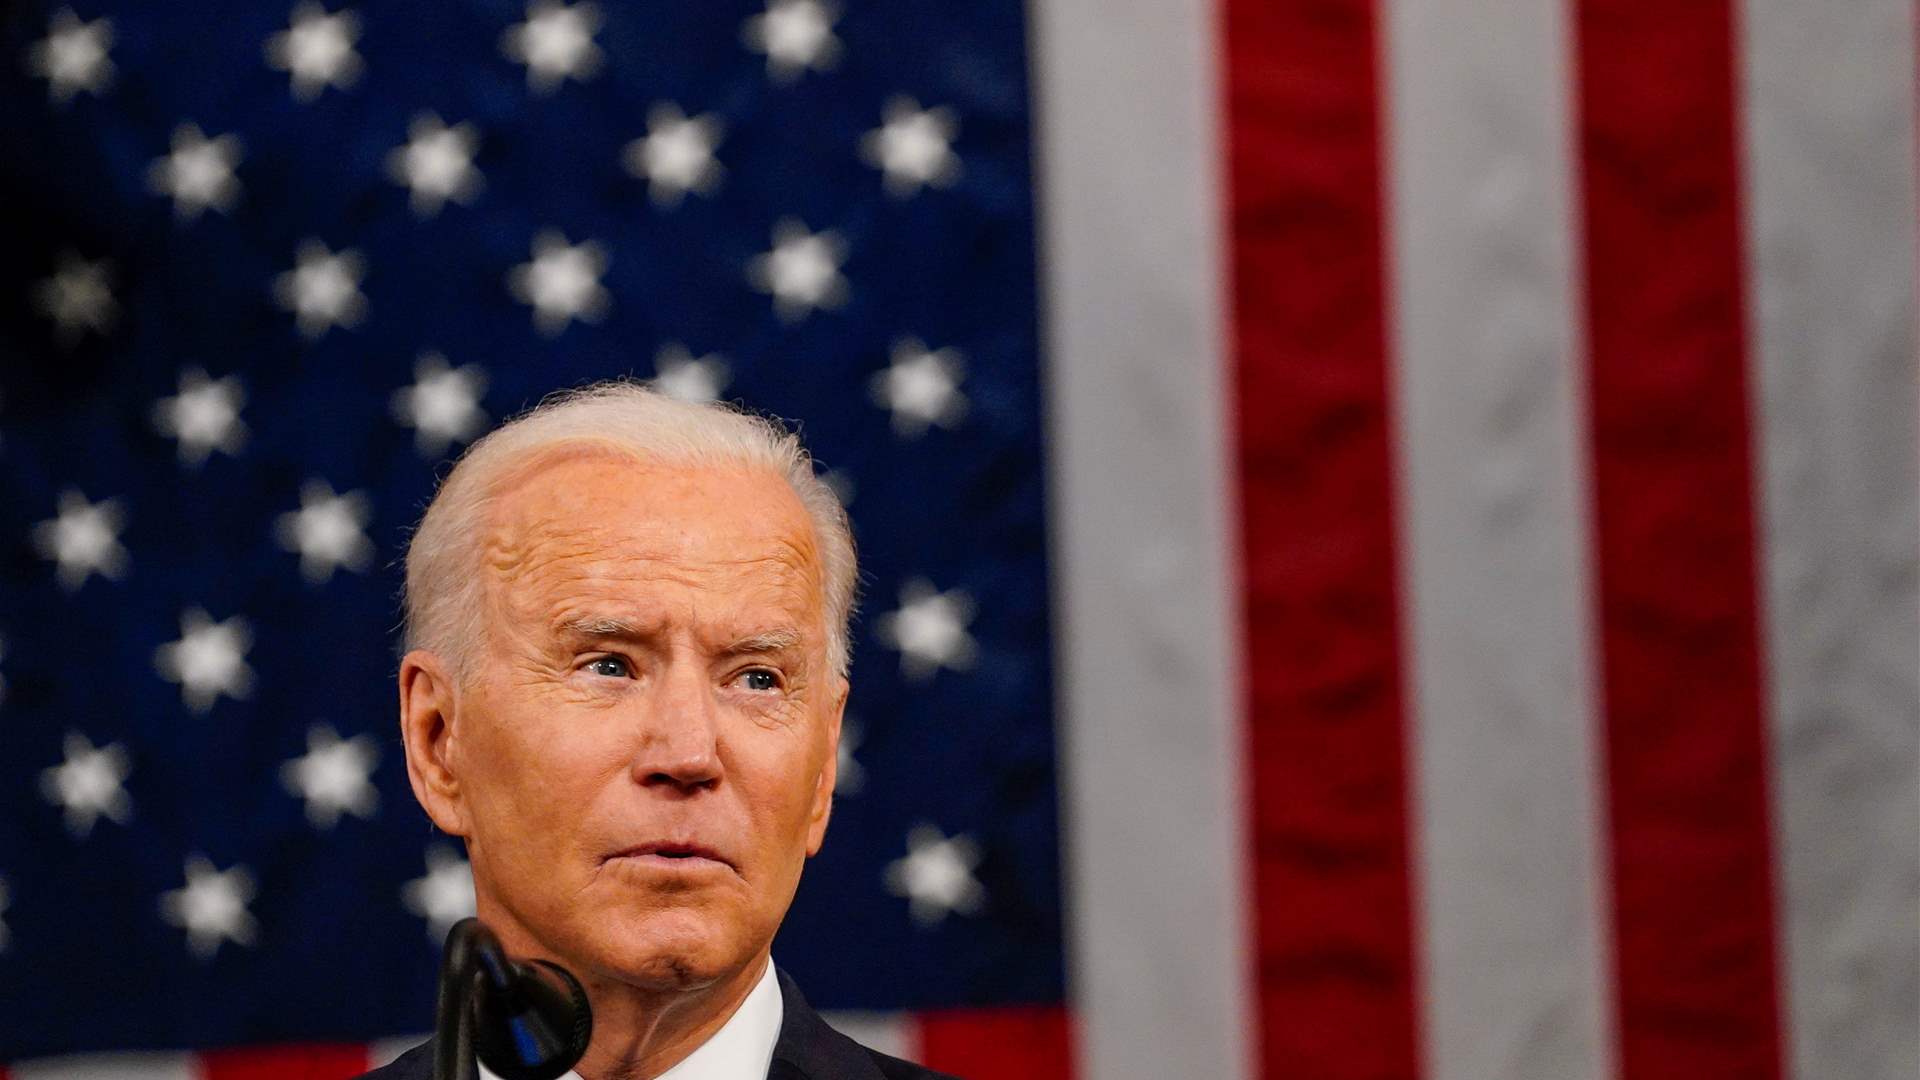 US Justice Dept found more classified items in Biden home search